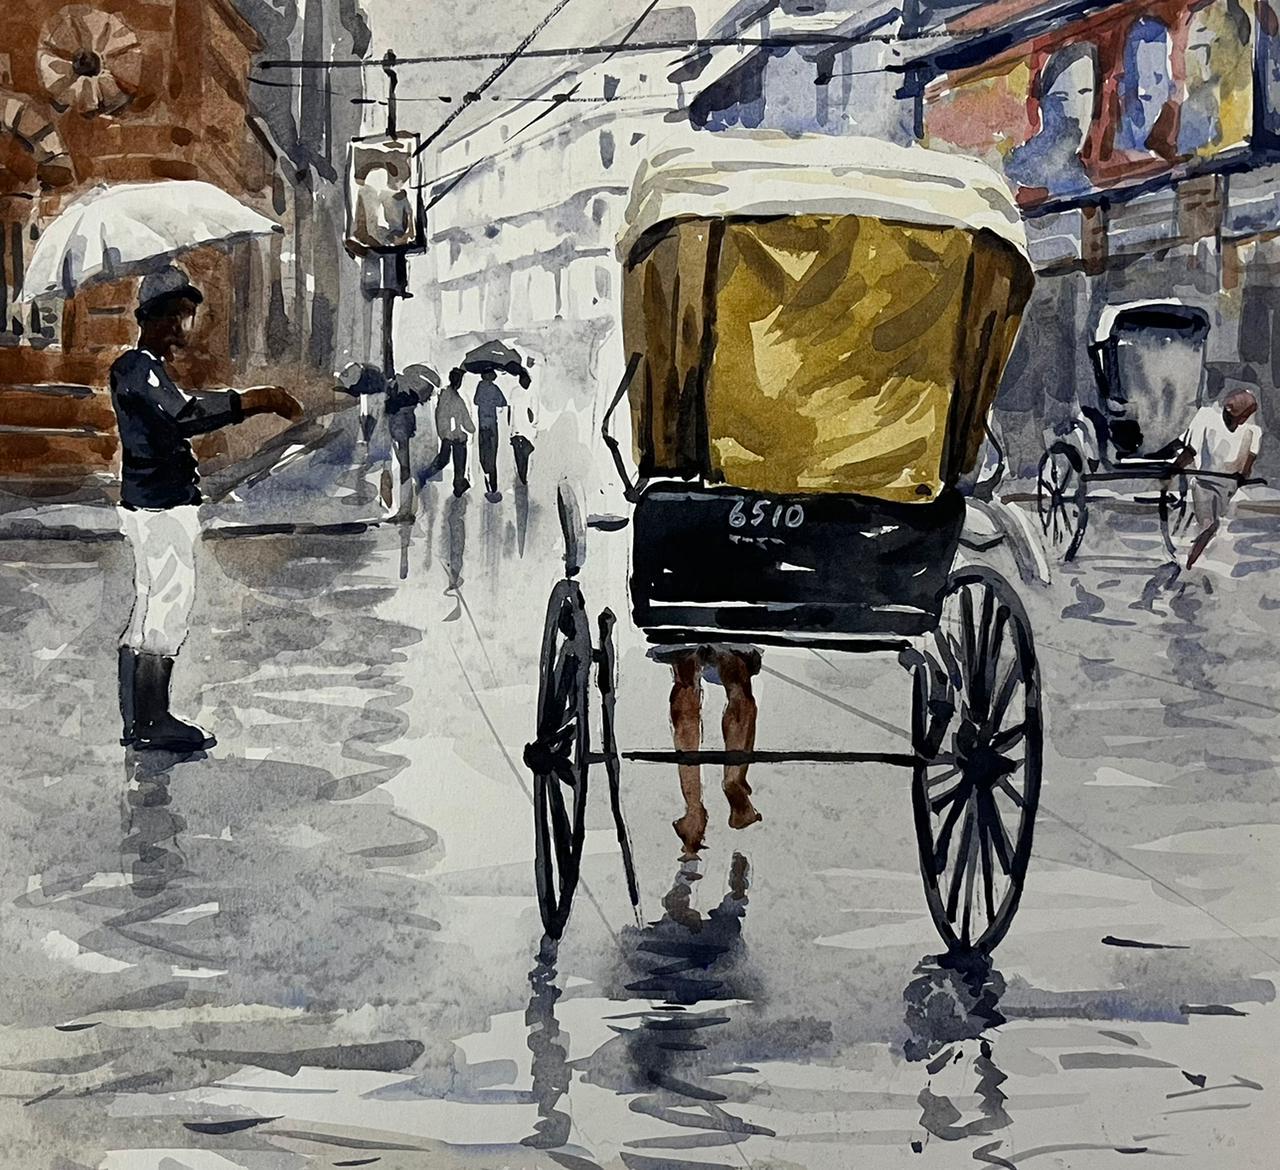 Kolkata city, (Set Of 4) Watercolour on Paper by Contemporary Artist “In Stock”